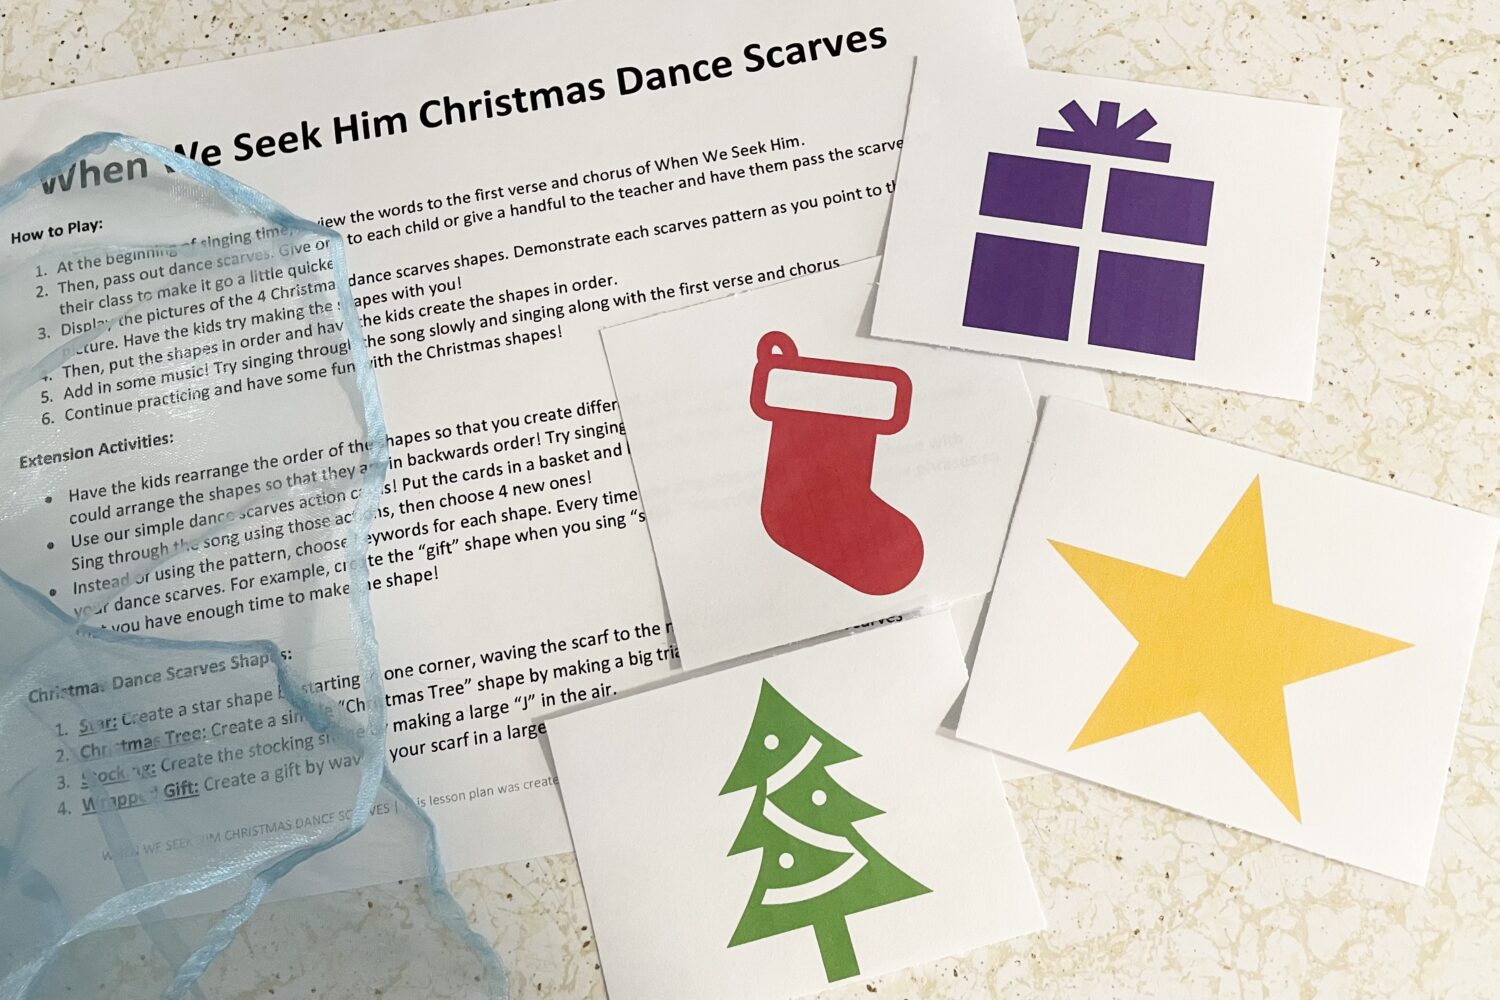 When We Seek Him Christmas Dance Scarves movement activity for children using dance scarves to create fun holiday shapes for LDS Primary Music Leaders teaching this song in singing time! 